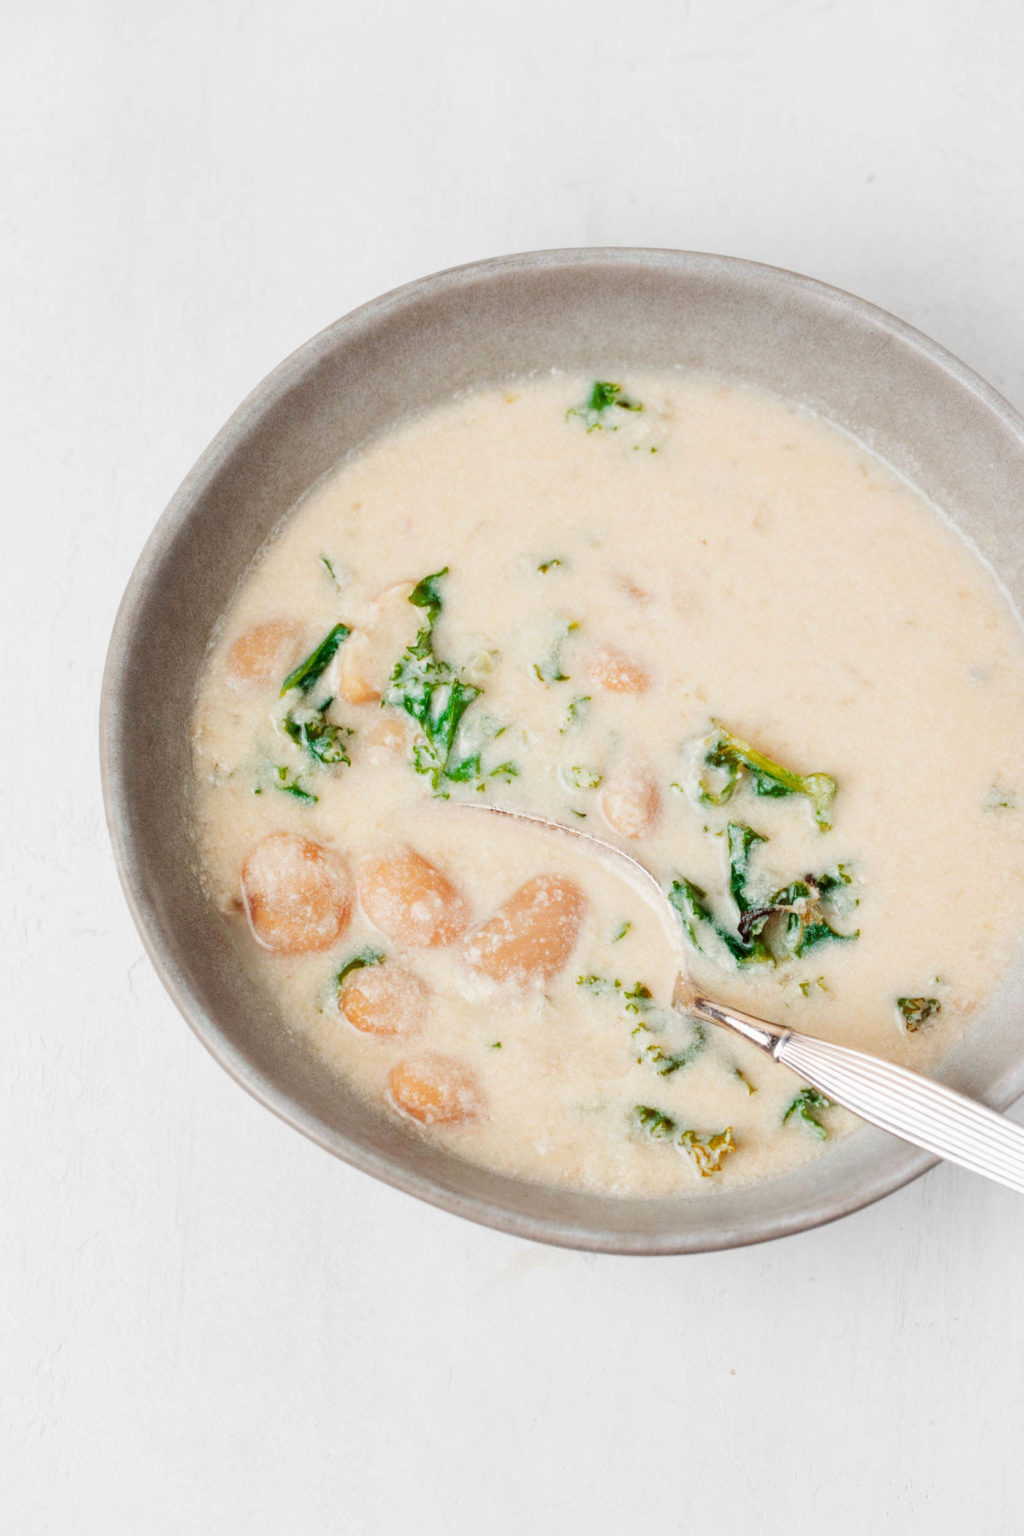 A gray, ceramic bowl holds a creamy white bean soup. A spoon is resting in it.